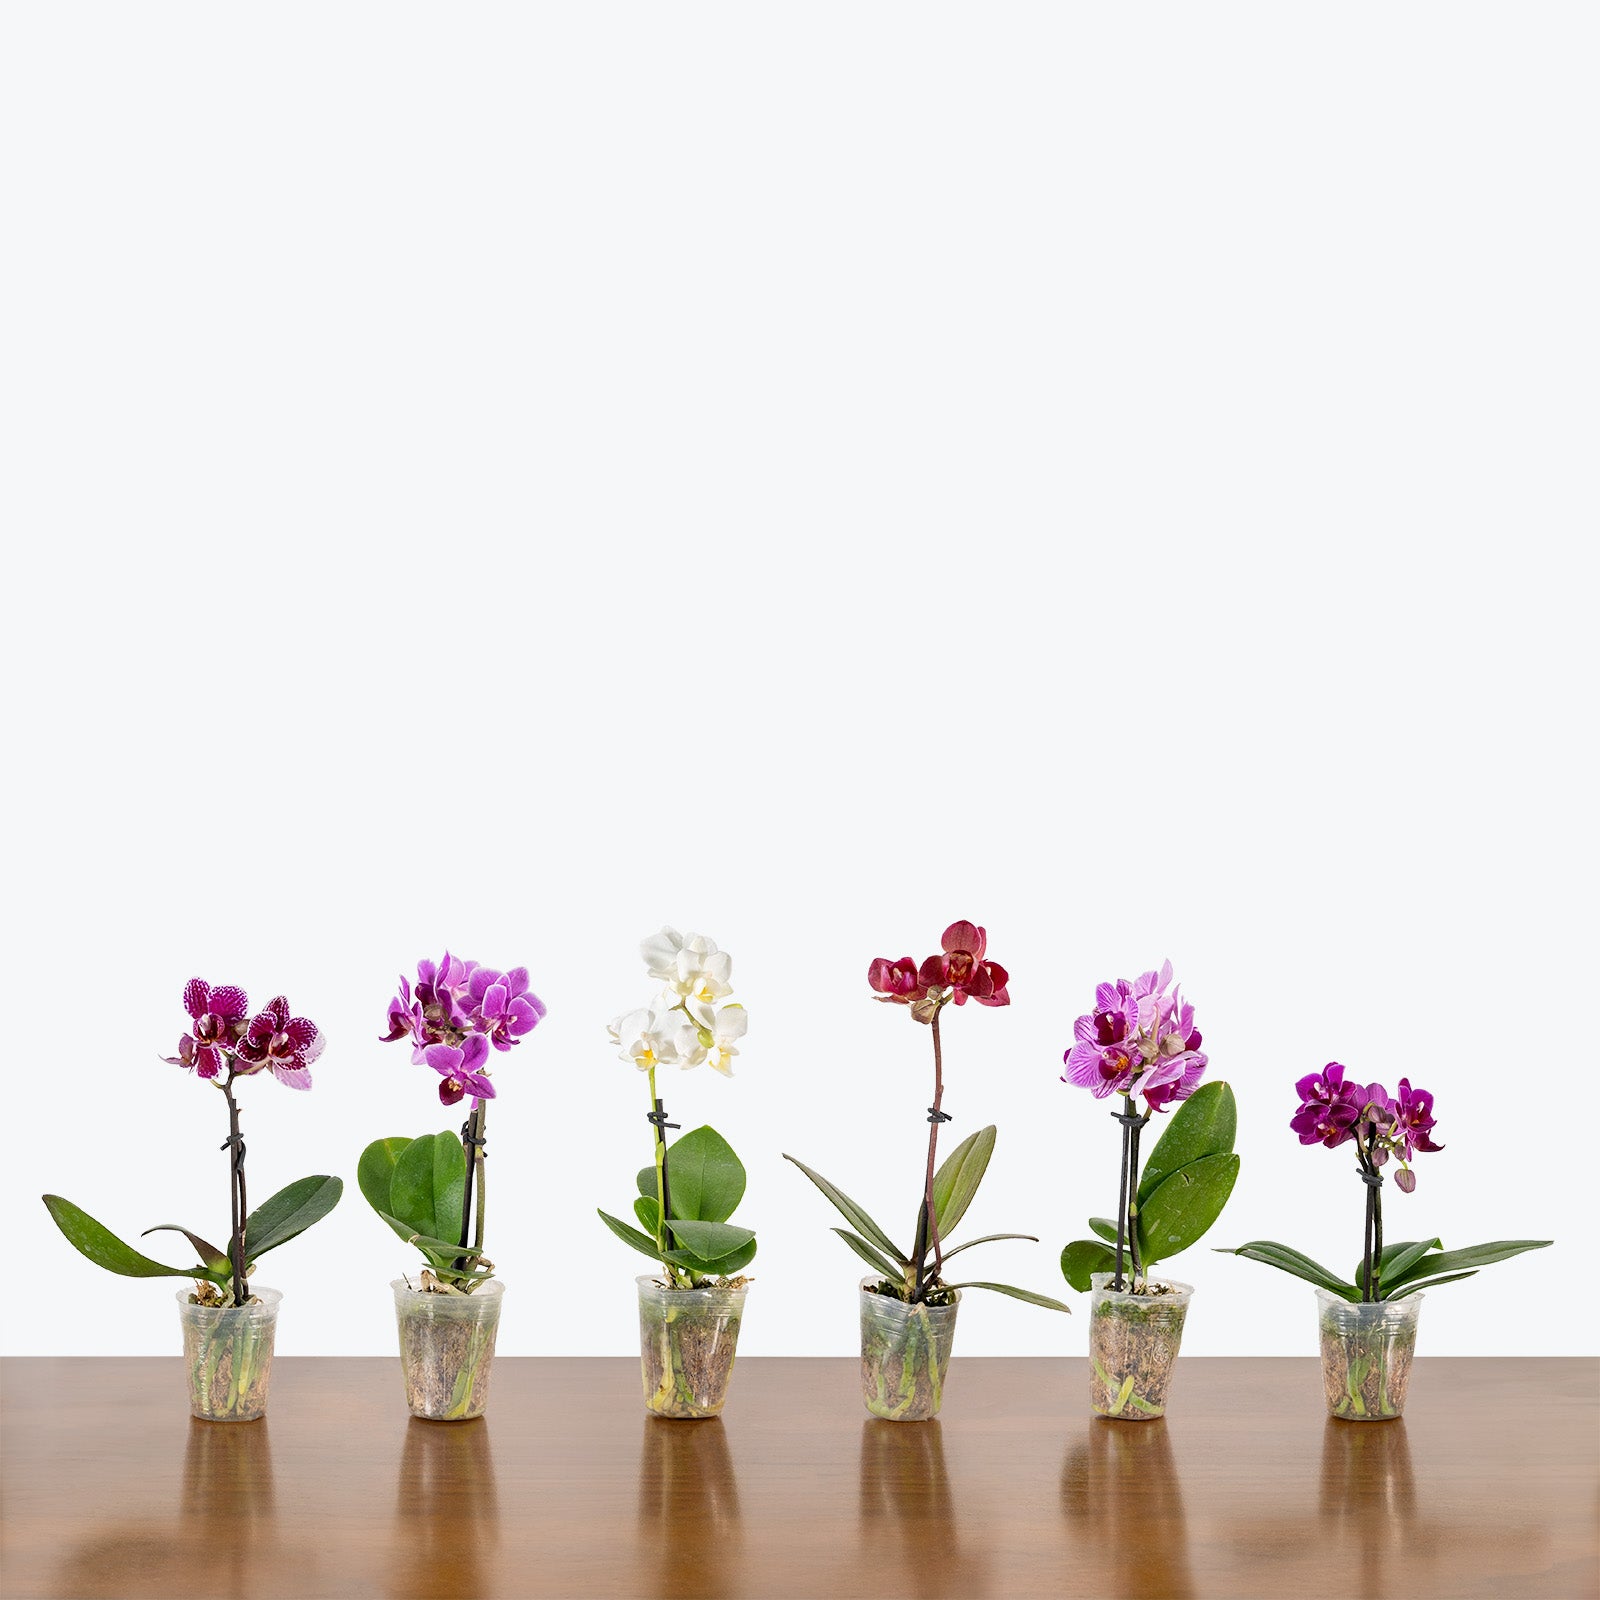 Mini Phalaenopsis Orchid | Care Guide and Pro Tips - Delivery from Toronto across Canada - JOMO Studio